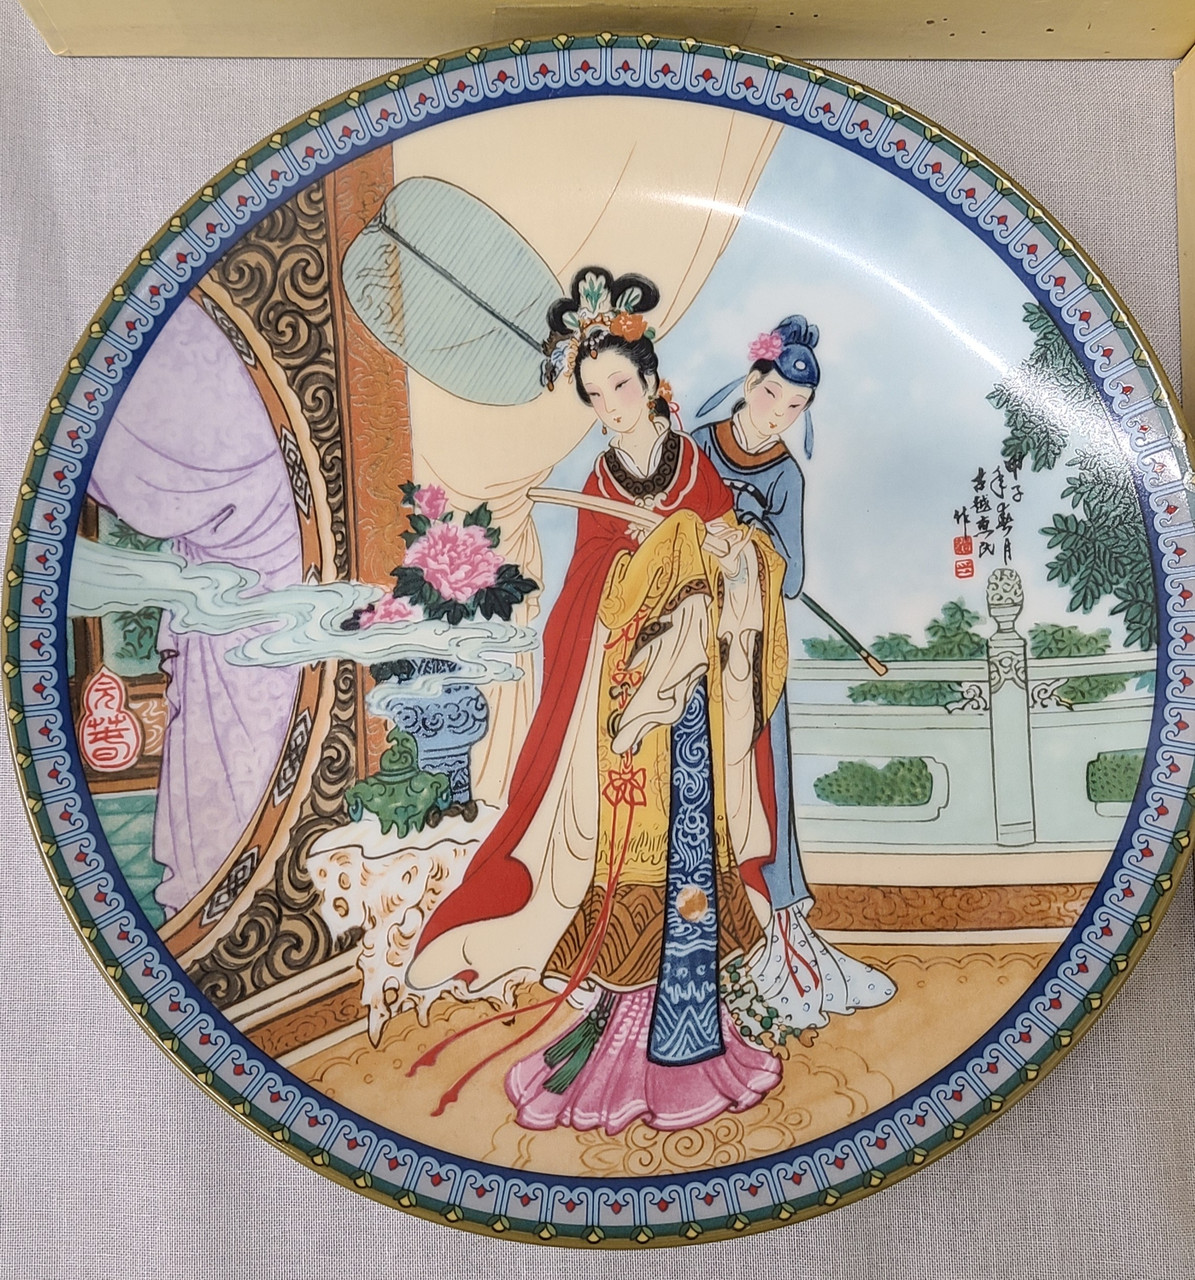 4 Imperial Jingdezhen Porcelain Plates (Beauties of the Red Mansion)